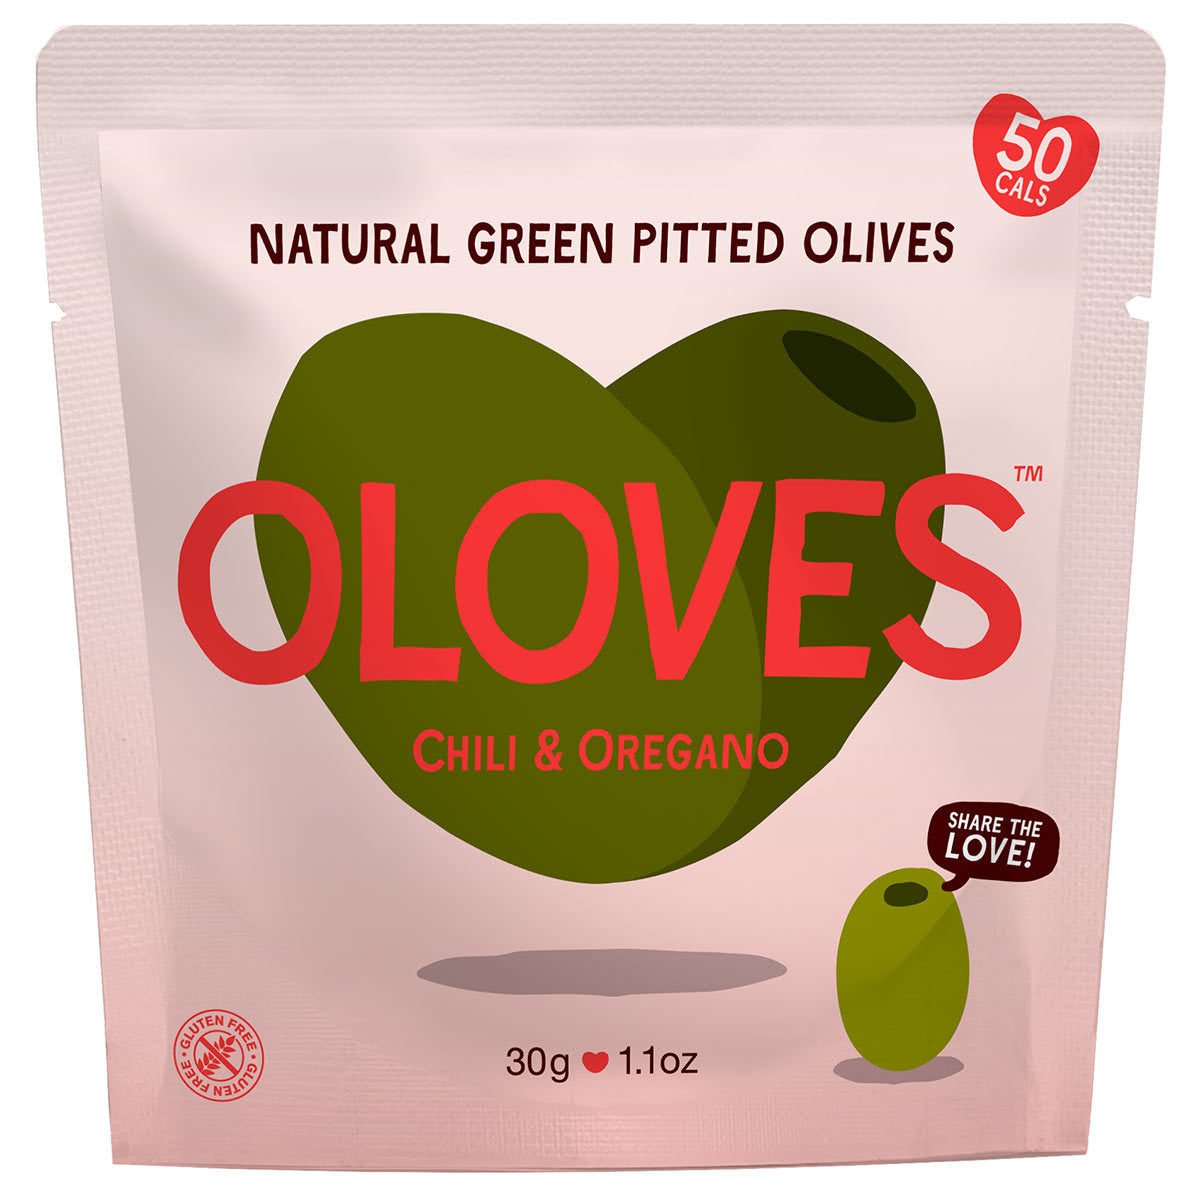 Oloves Chilli & Oregano Natural Green Pitted Olives, 20 x 30g Flavoured Snacks Costco UK   